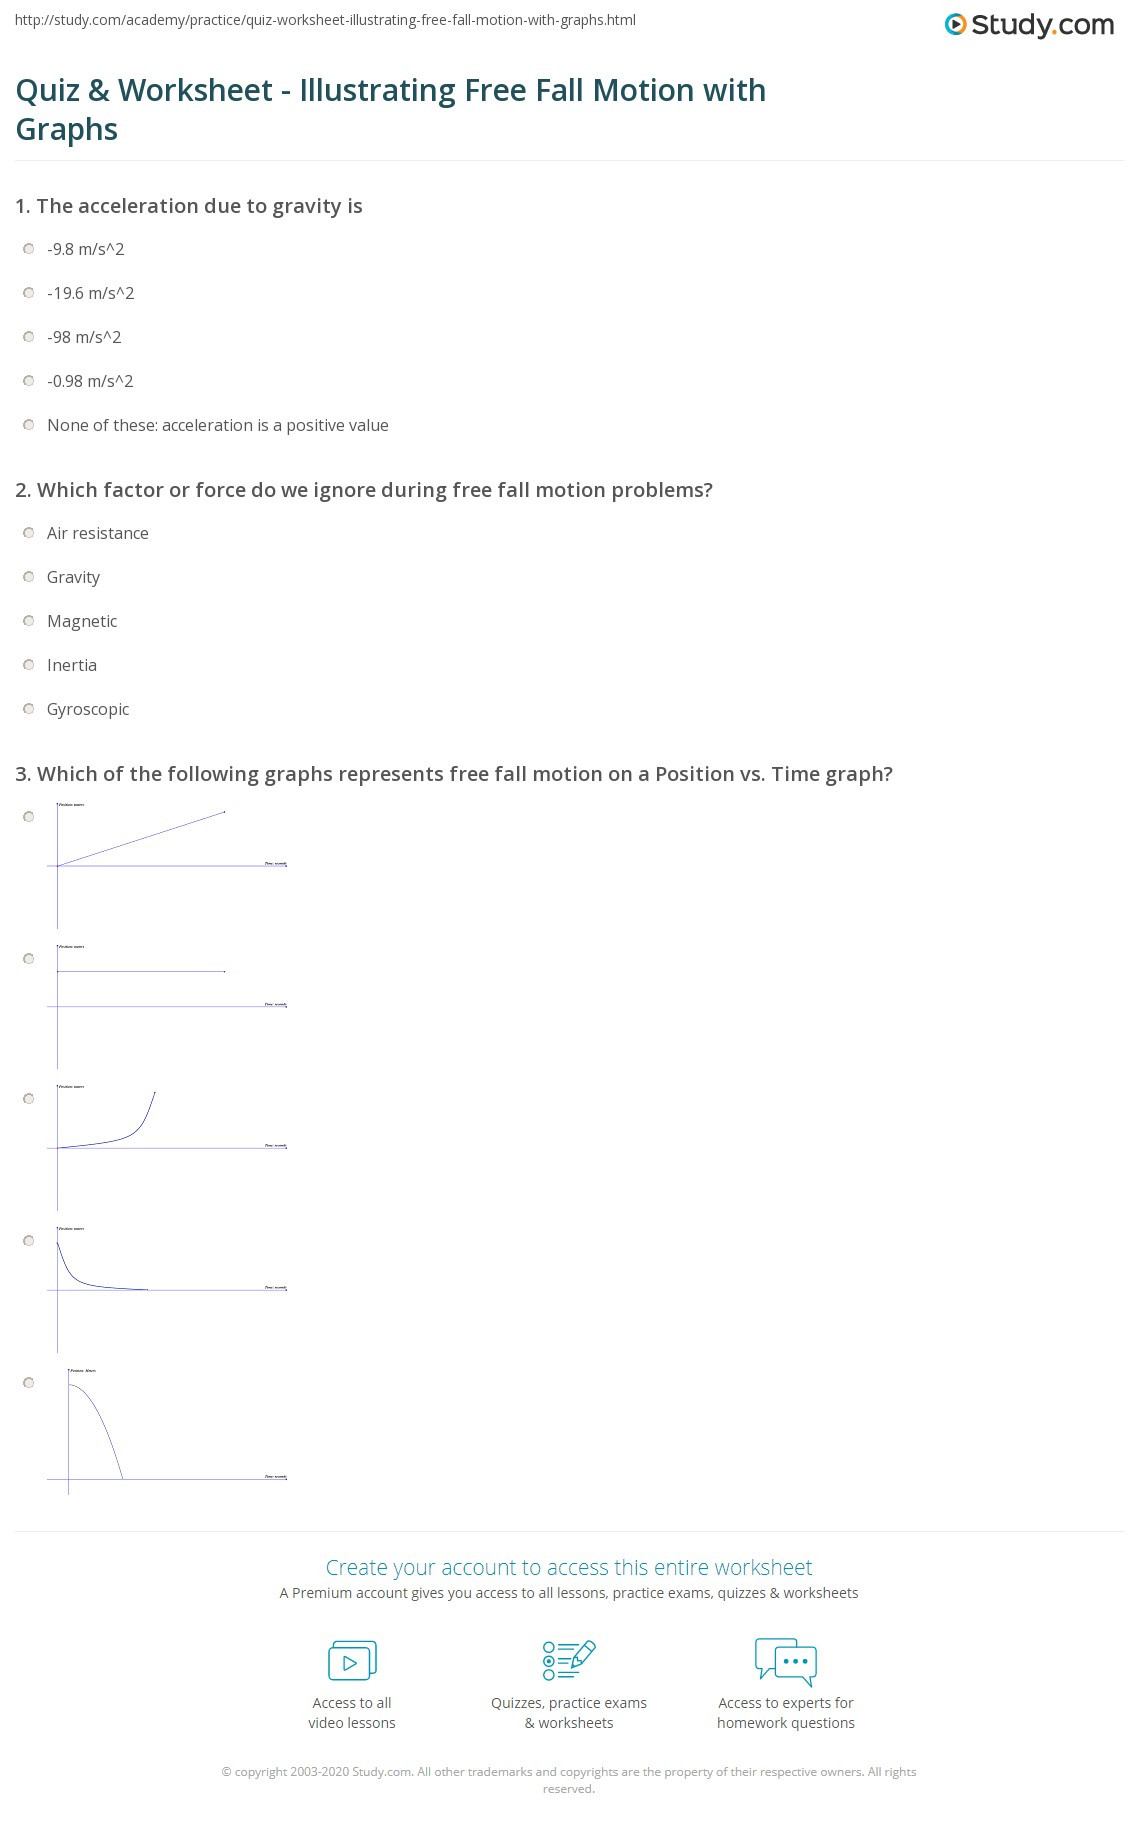 Free Fall Problems Worksheet Quiz &amp; Worksheet Illustrating Free Fall Motion with Graphs